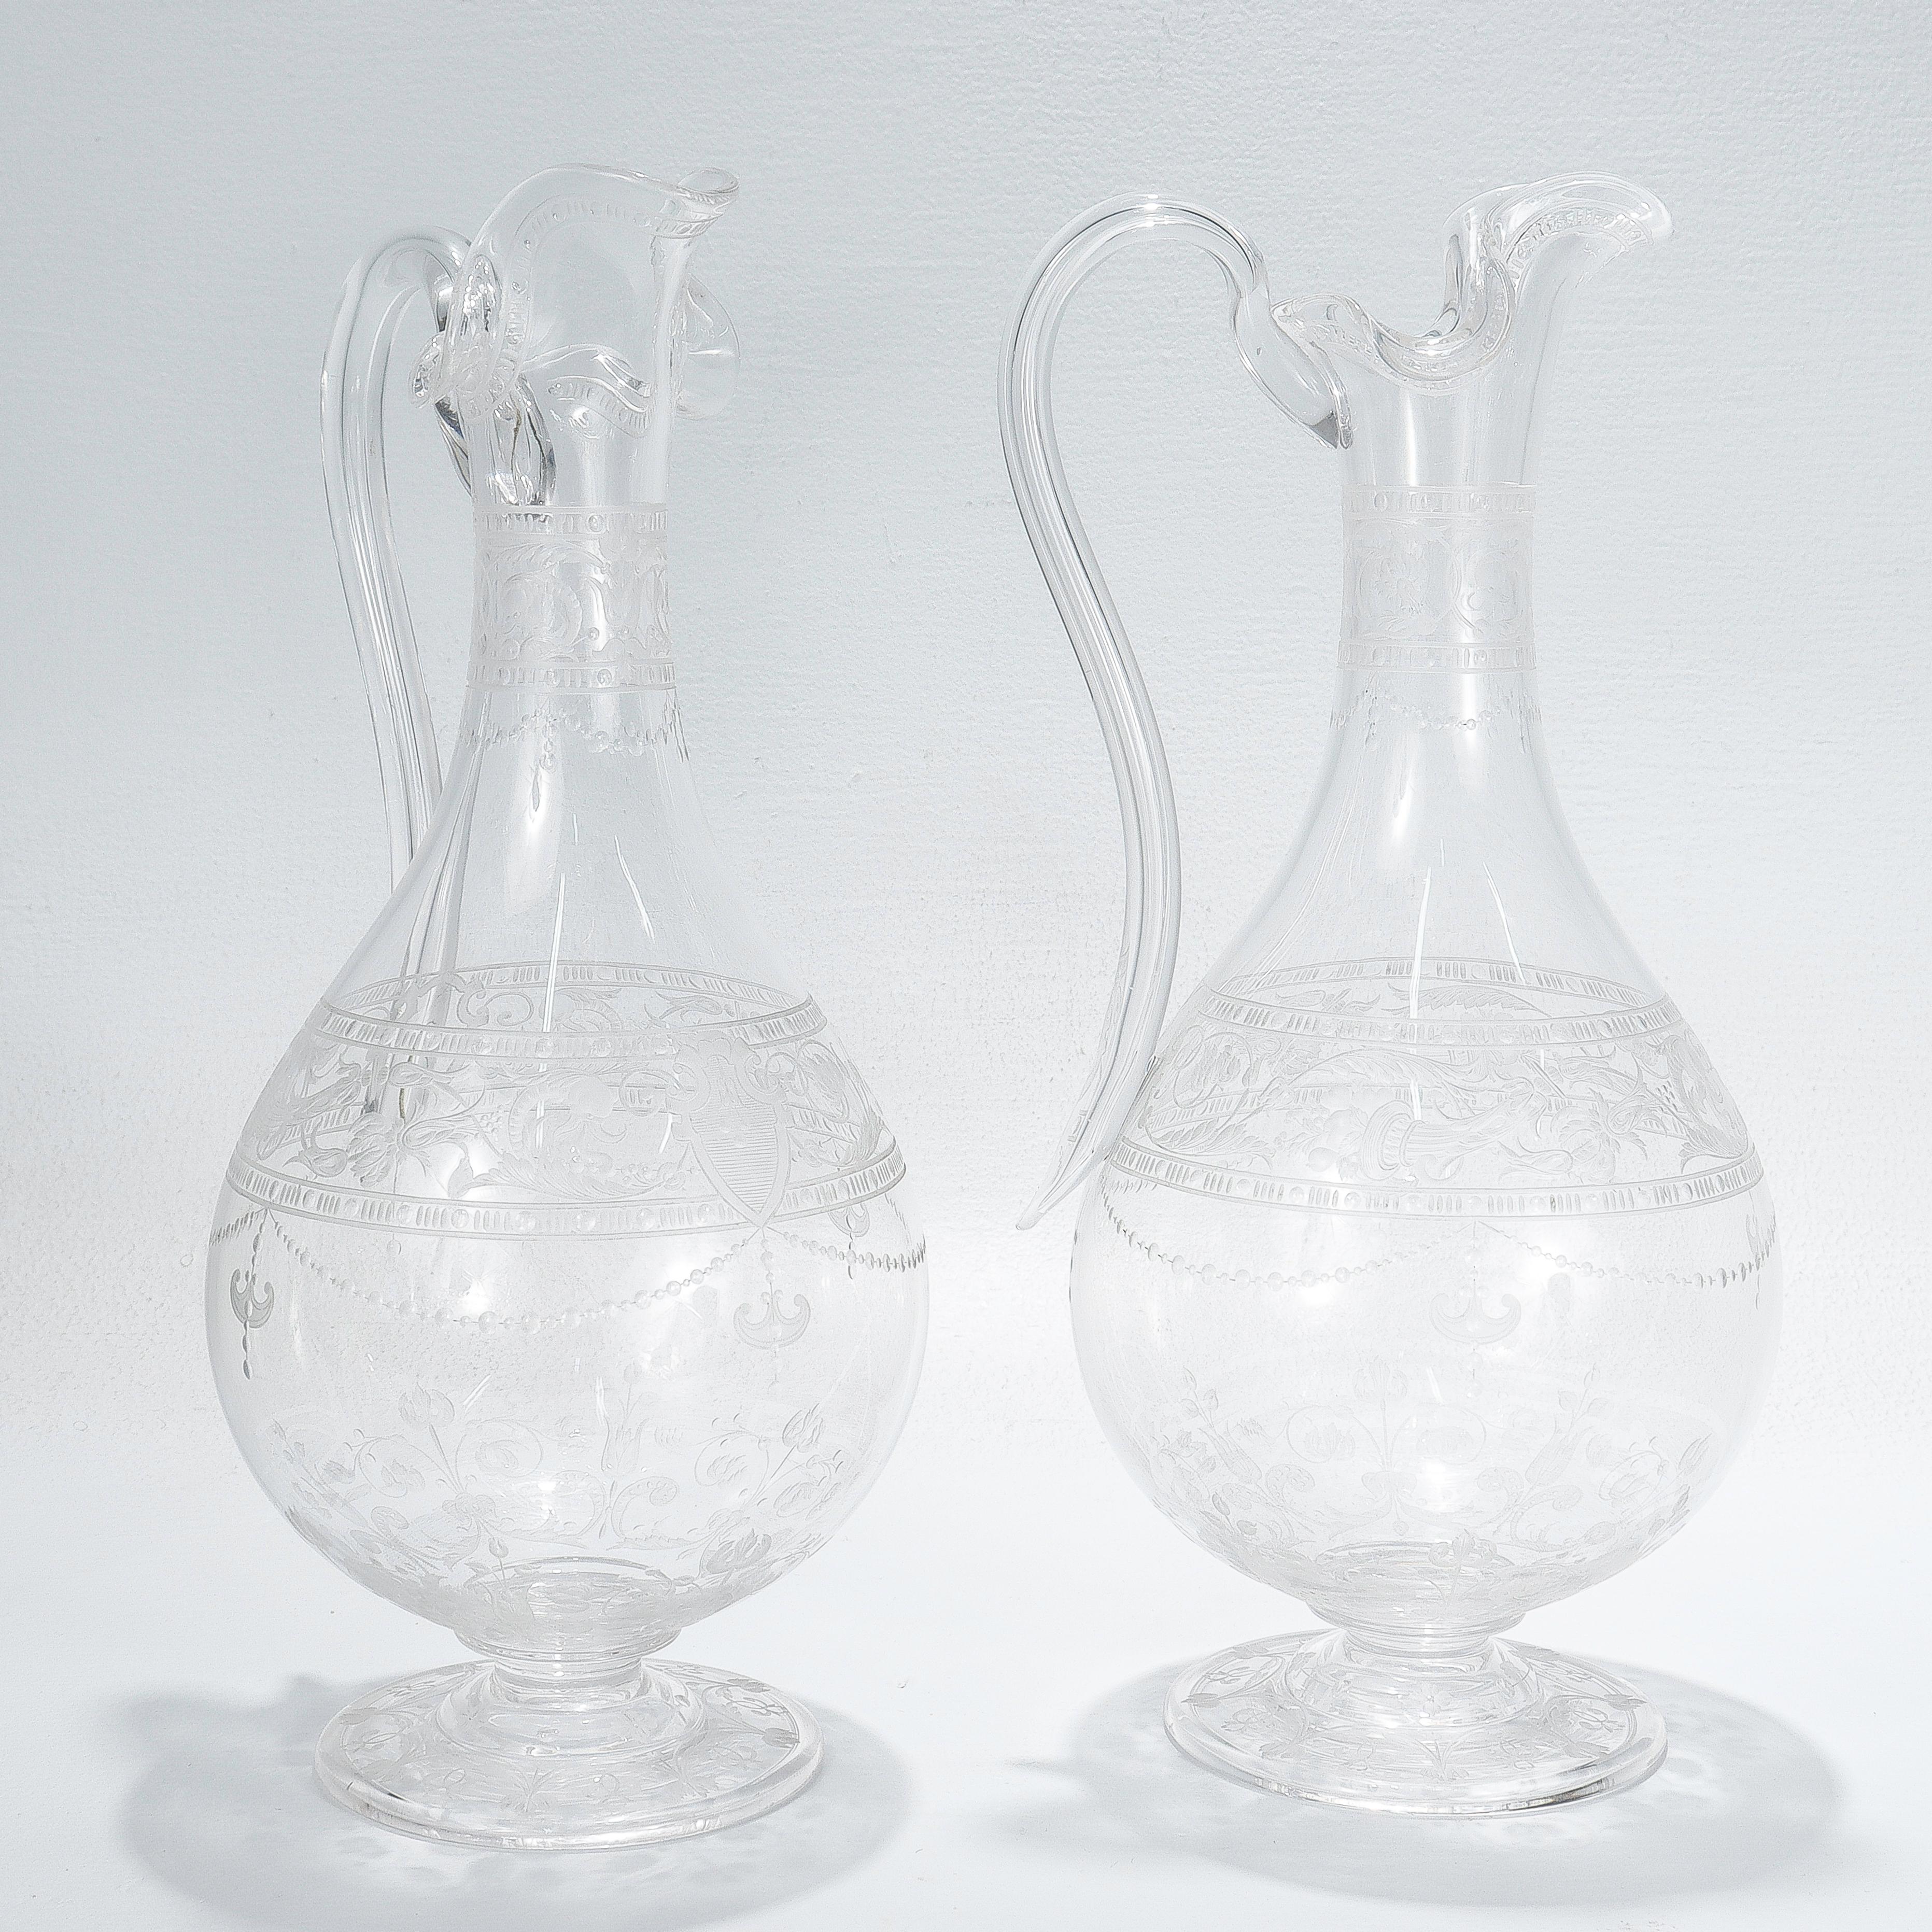 Edwardian Pair of Antique Stourbridge Etched & Engraved Glass Water Pitchers or Decanters For Sale